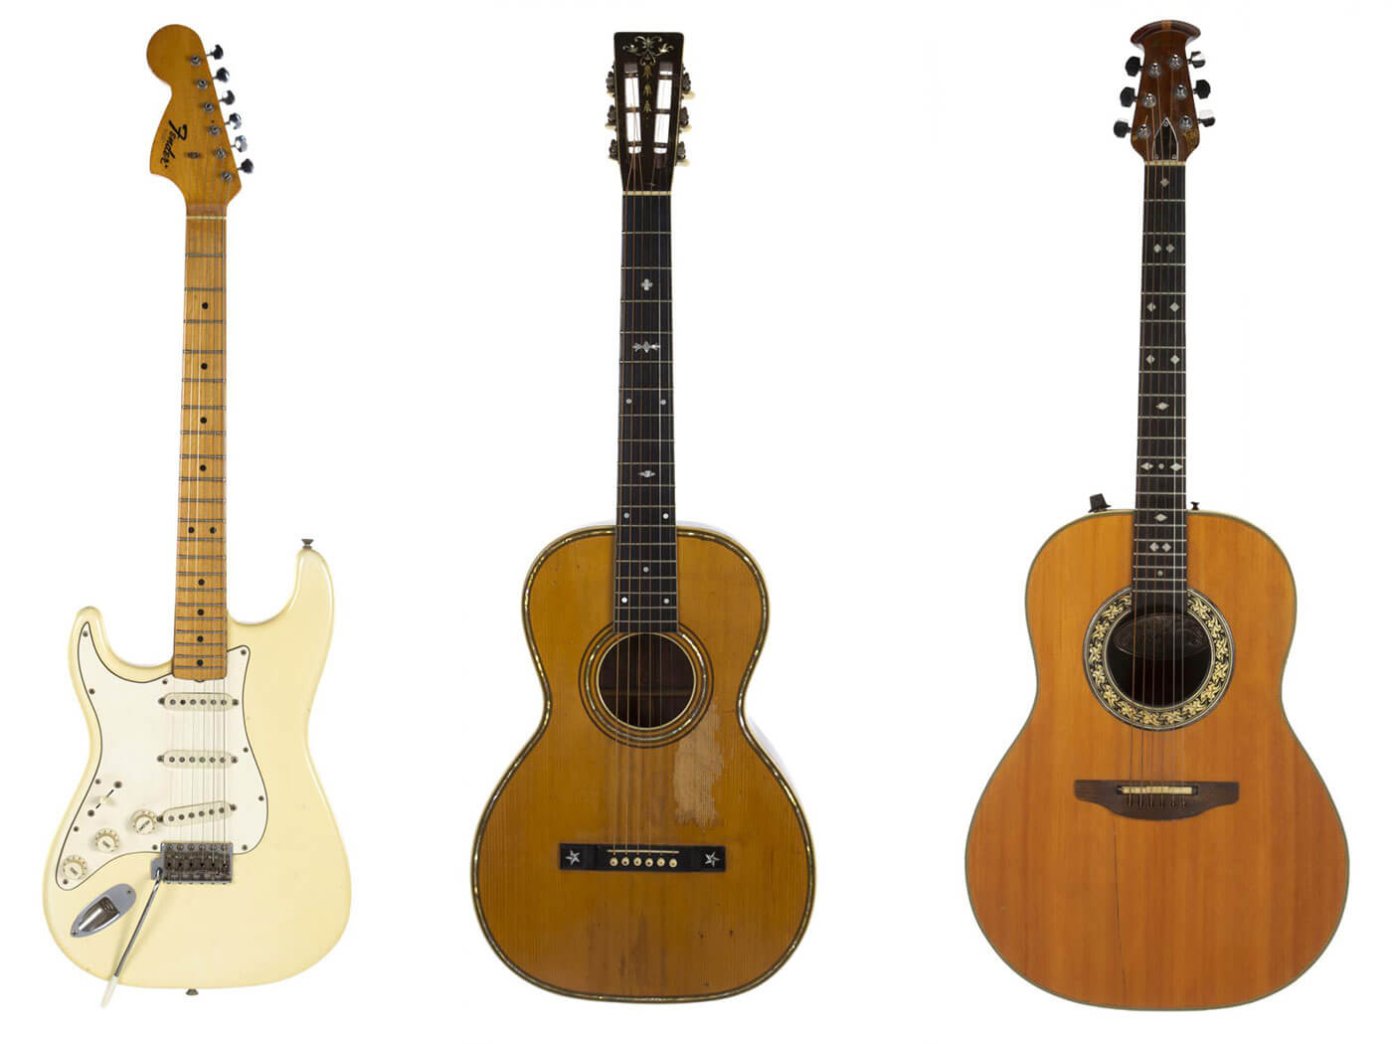 Guitars owned and played by Hendrix and Bob Marley to be auctioned off